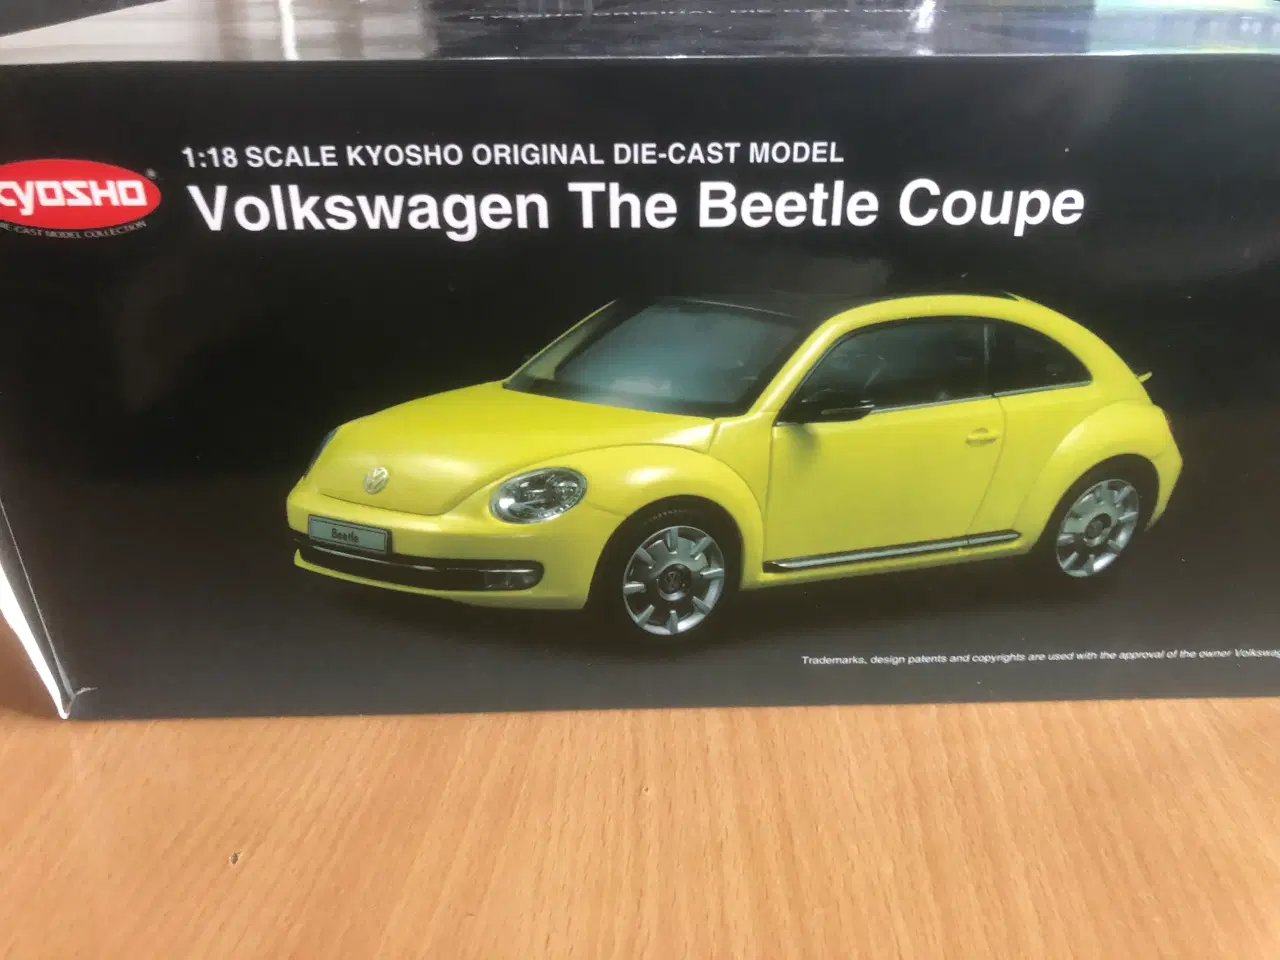 Billede 1 - 1:18 VW The Beetle Coupe